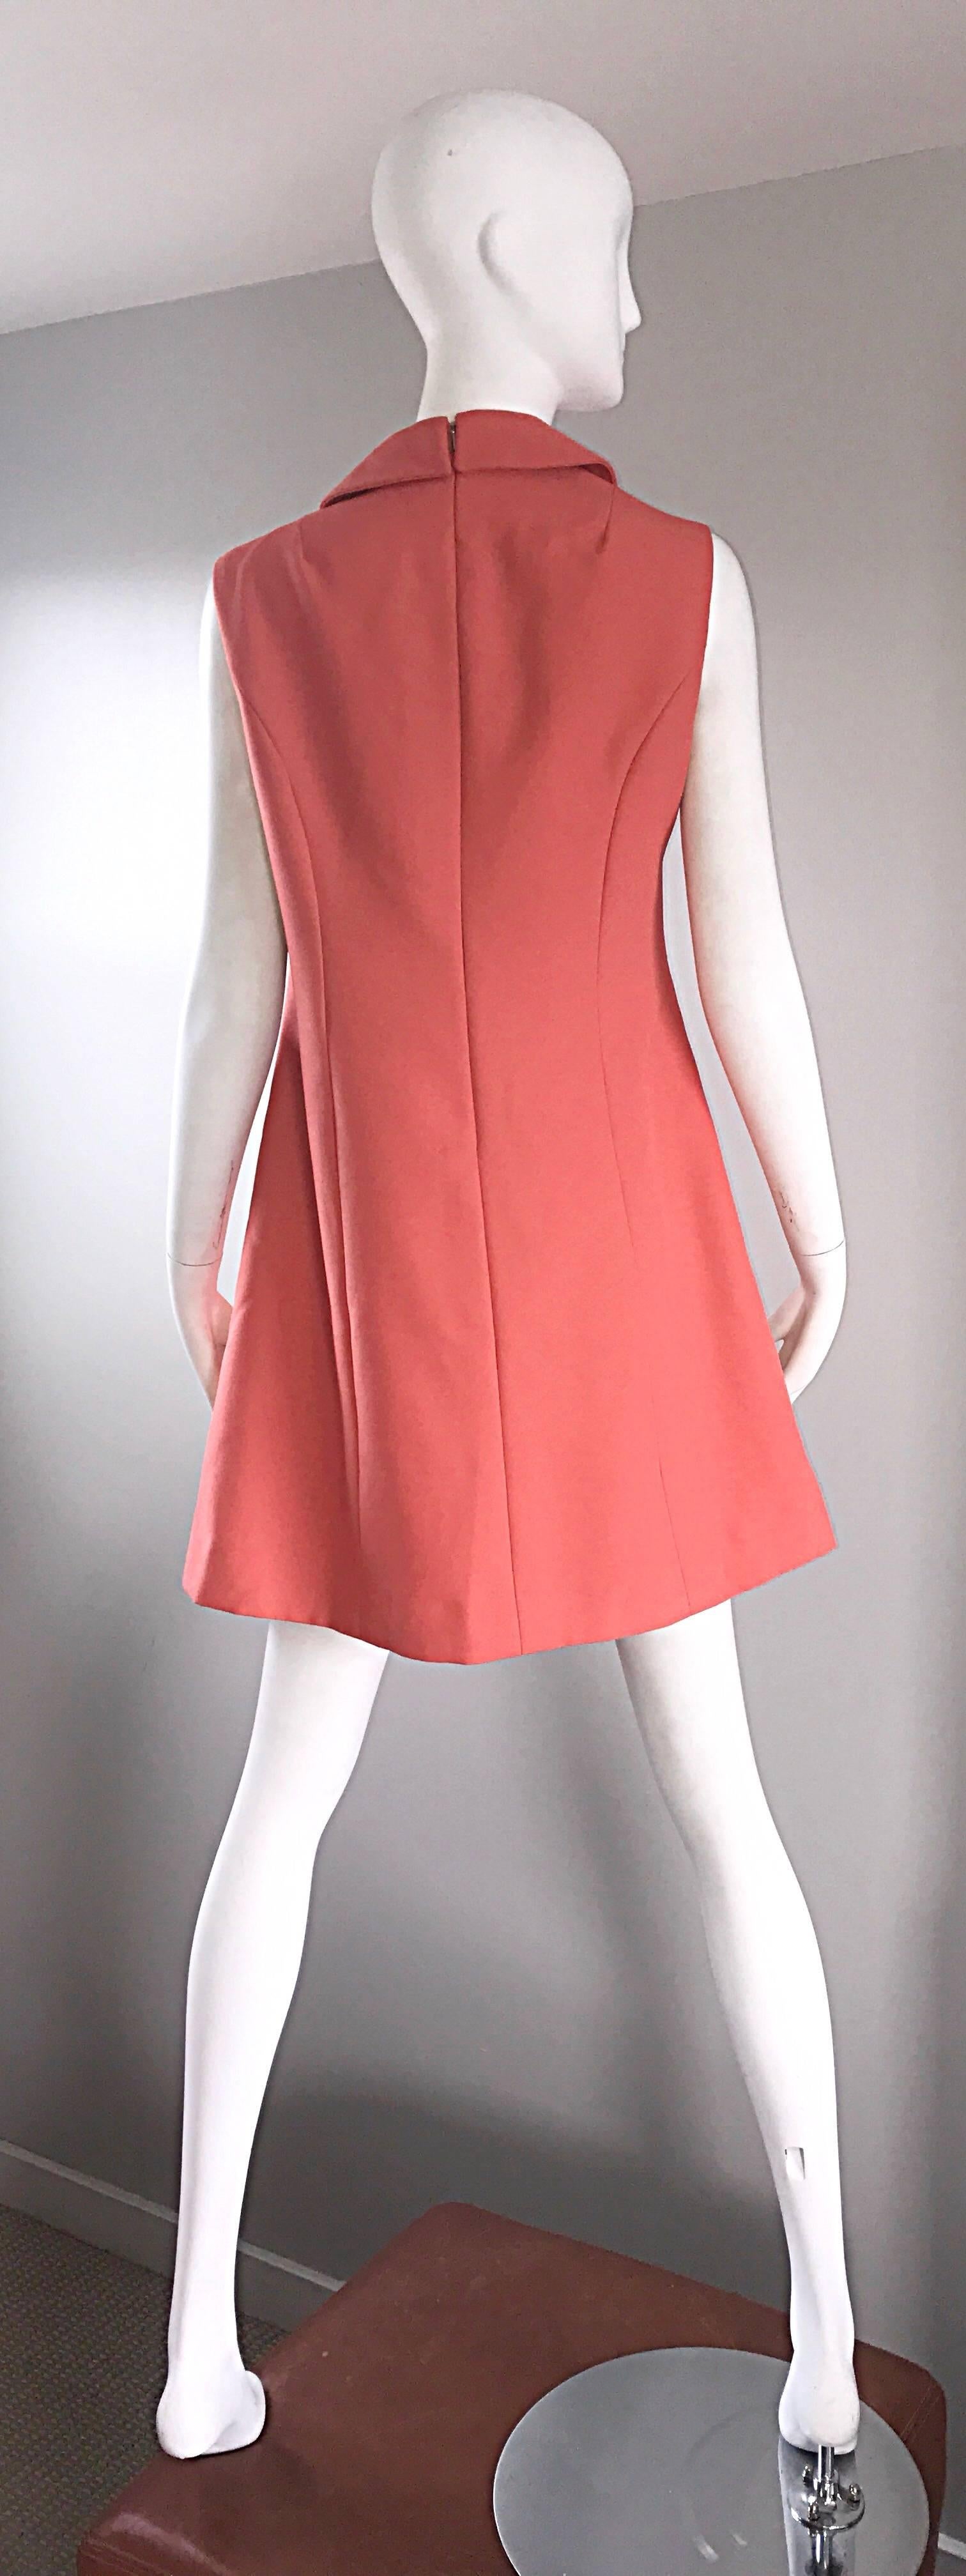 Women's Chic 1960s Coral Salmon Pink Beaded Necktie Vintage A - Line 60s Shift Dress